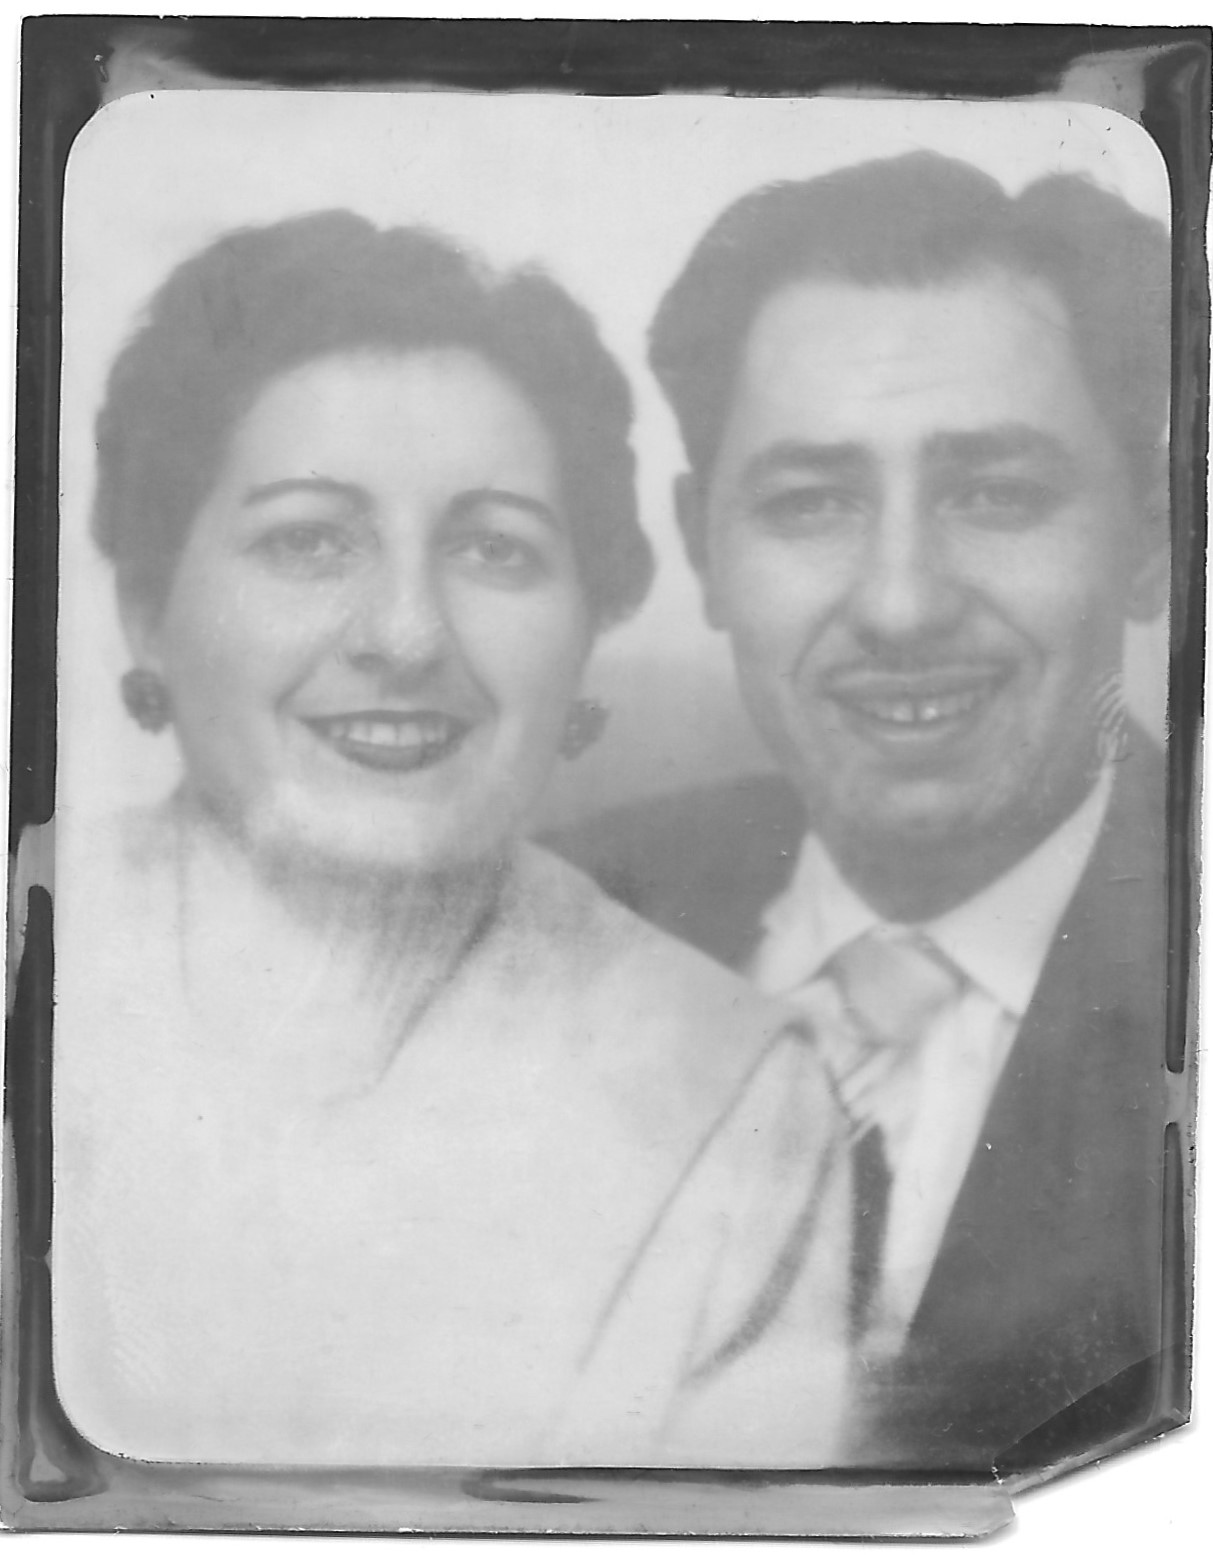 24 Archie and Helen 1954.jpg